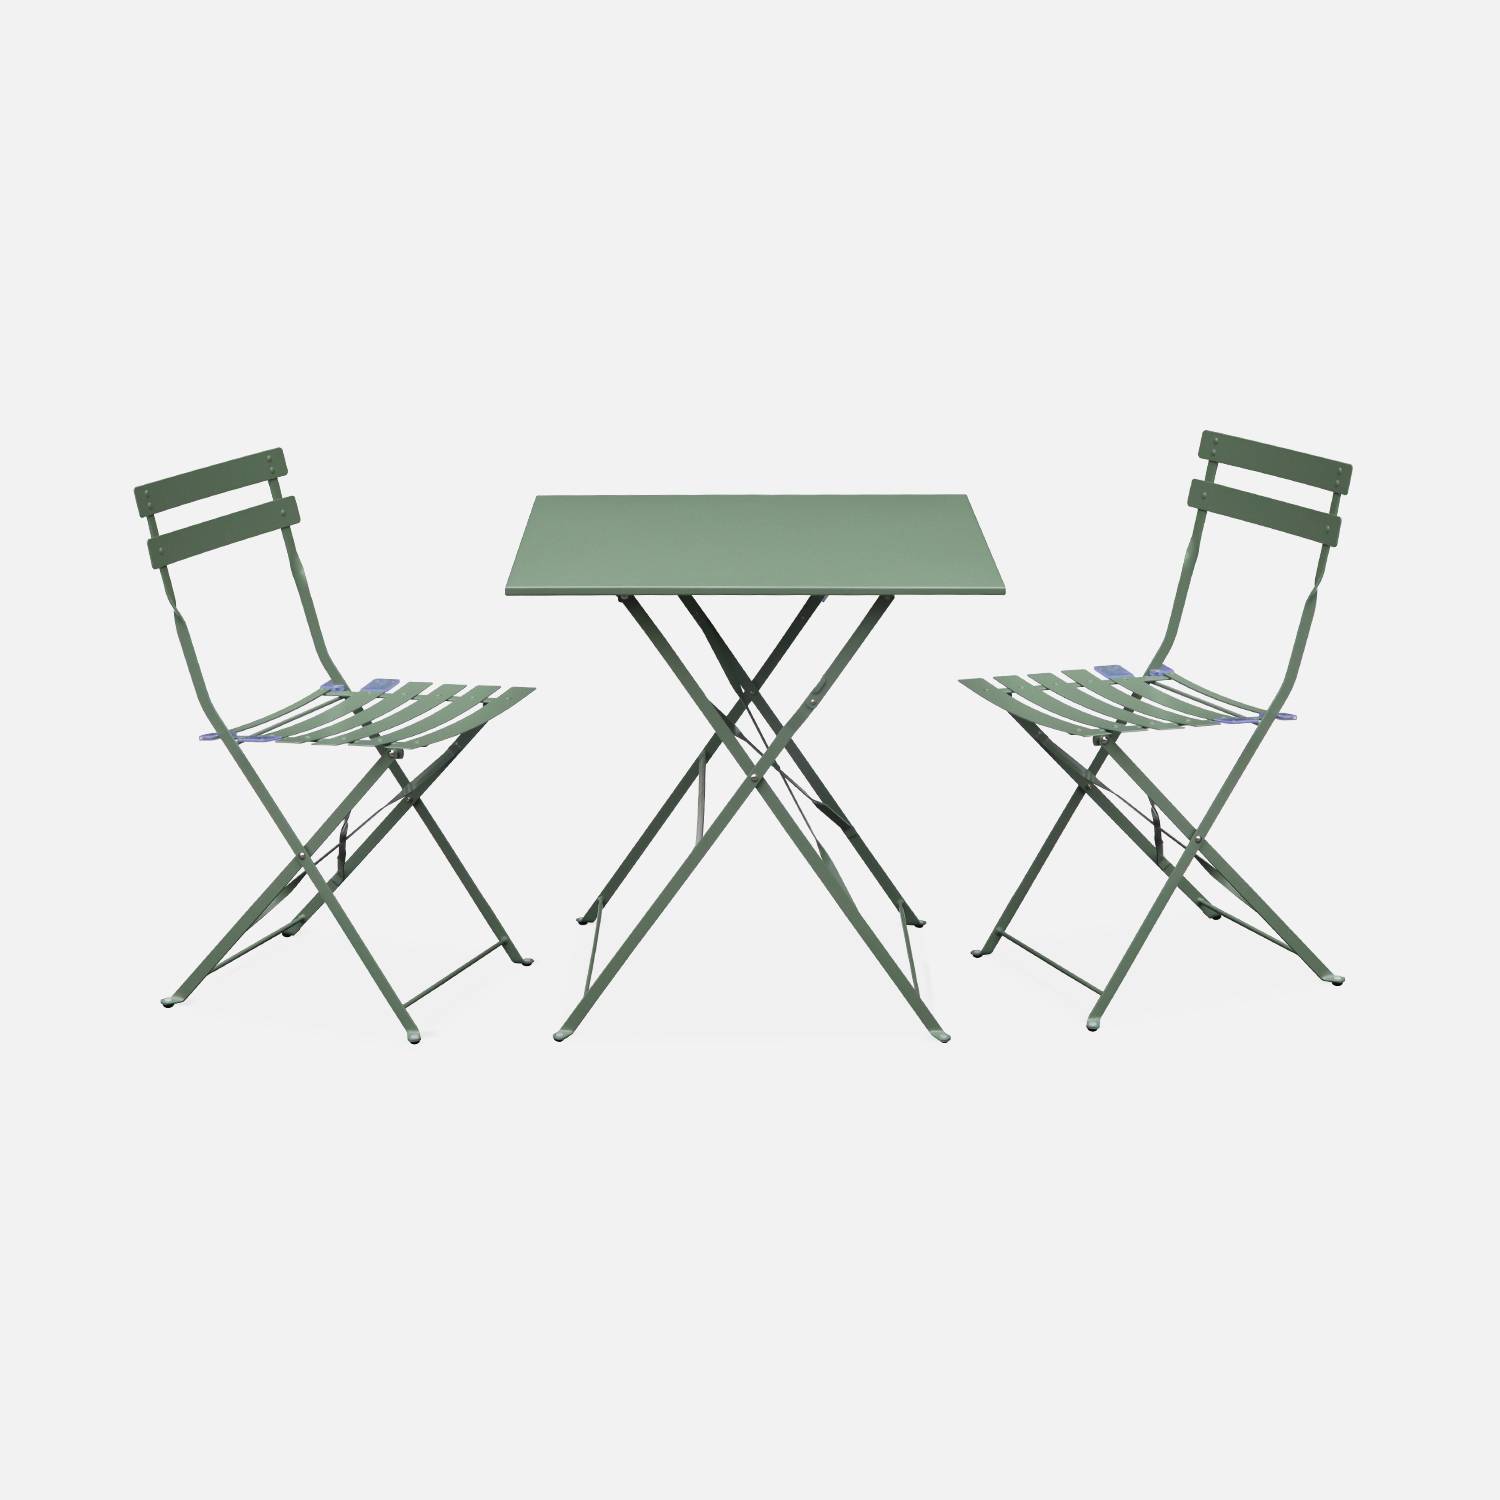 2-seater foldable thermo-lacquered steel bistro garden table with chairs, 70x70cm - Emilia - Sage geen Photo2